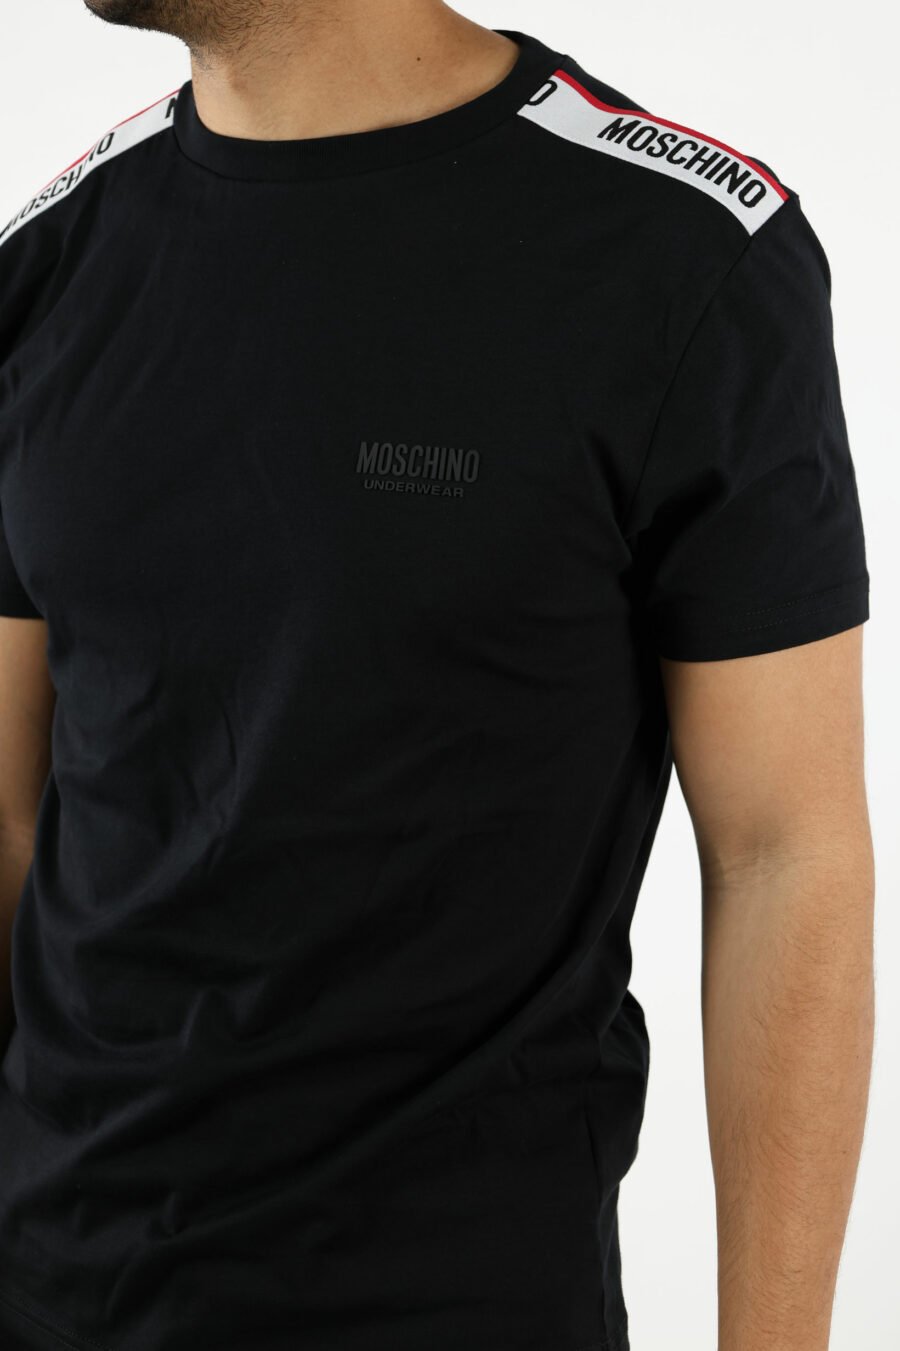 Black T-shirt with white logo with red ribbon detail on shoulders - 110981